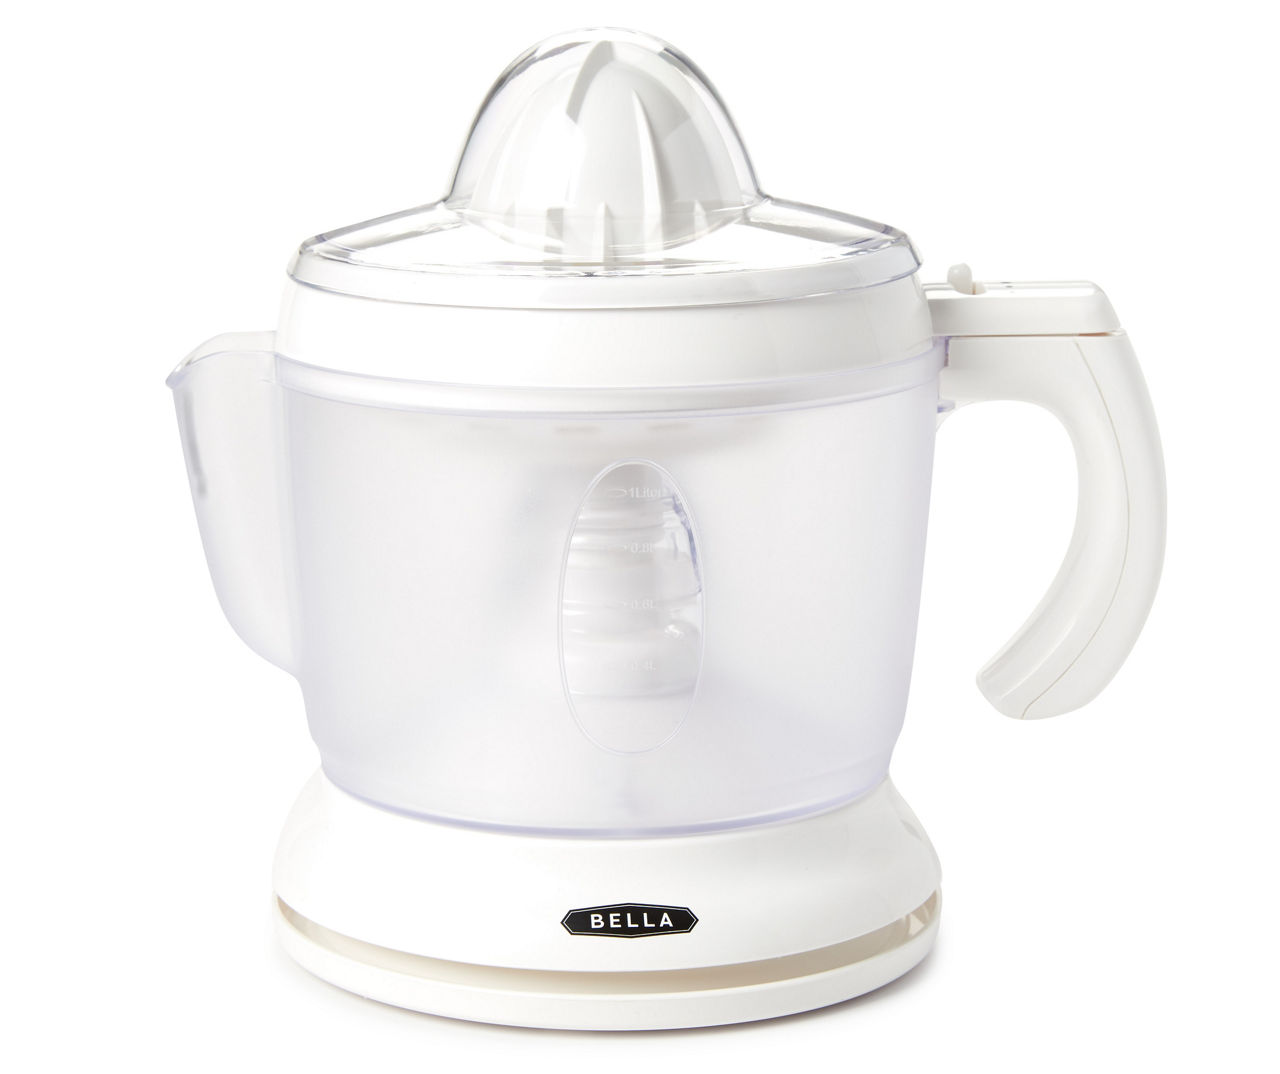 Bella Juicer on Sale! Create delicious Juice Right at Home!